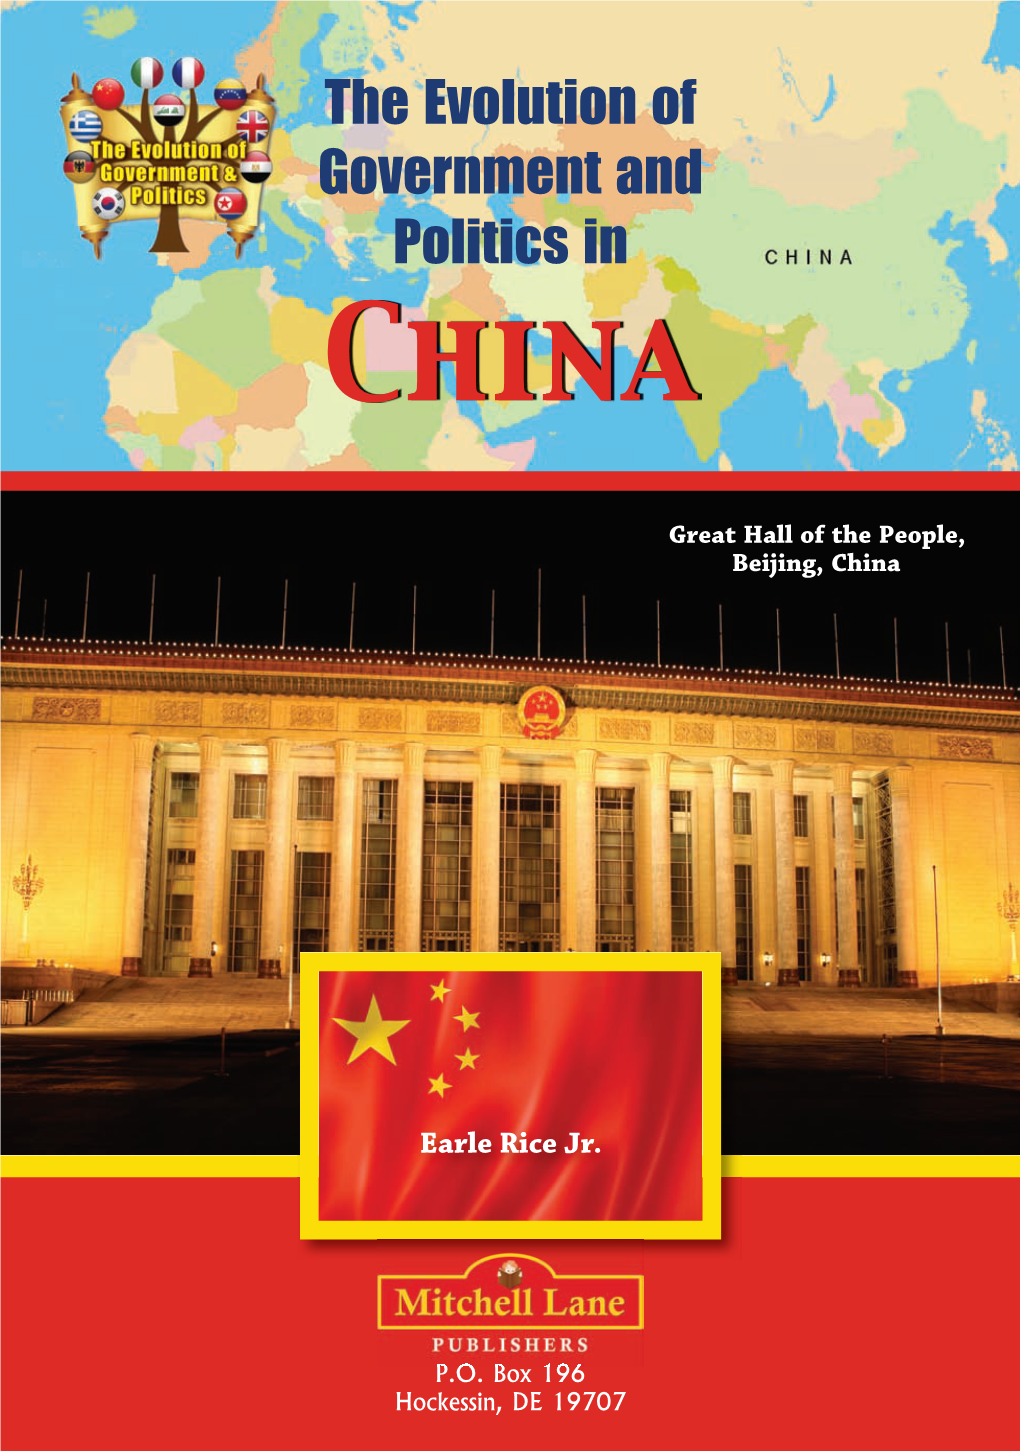 The Evolution of Government and Politics in China